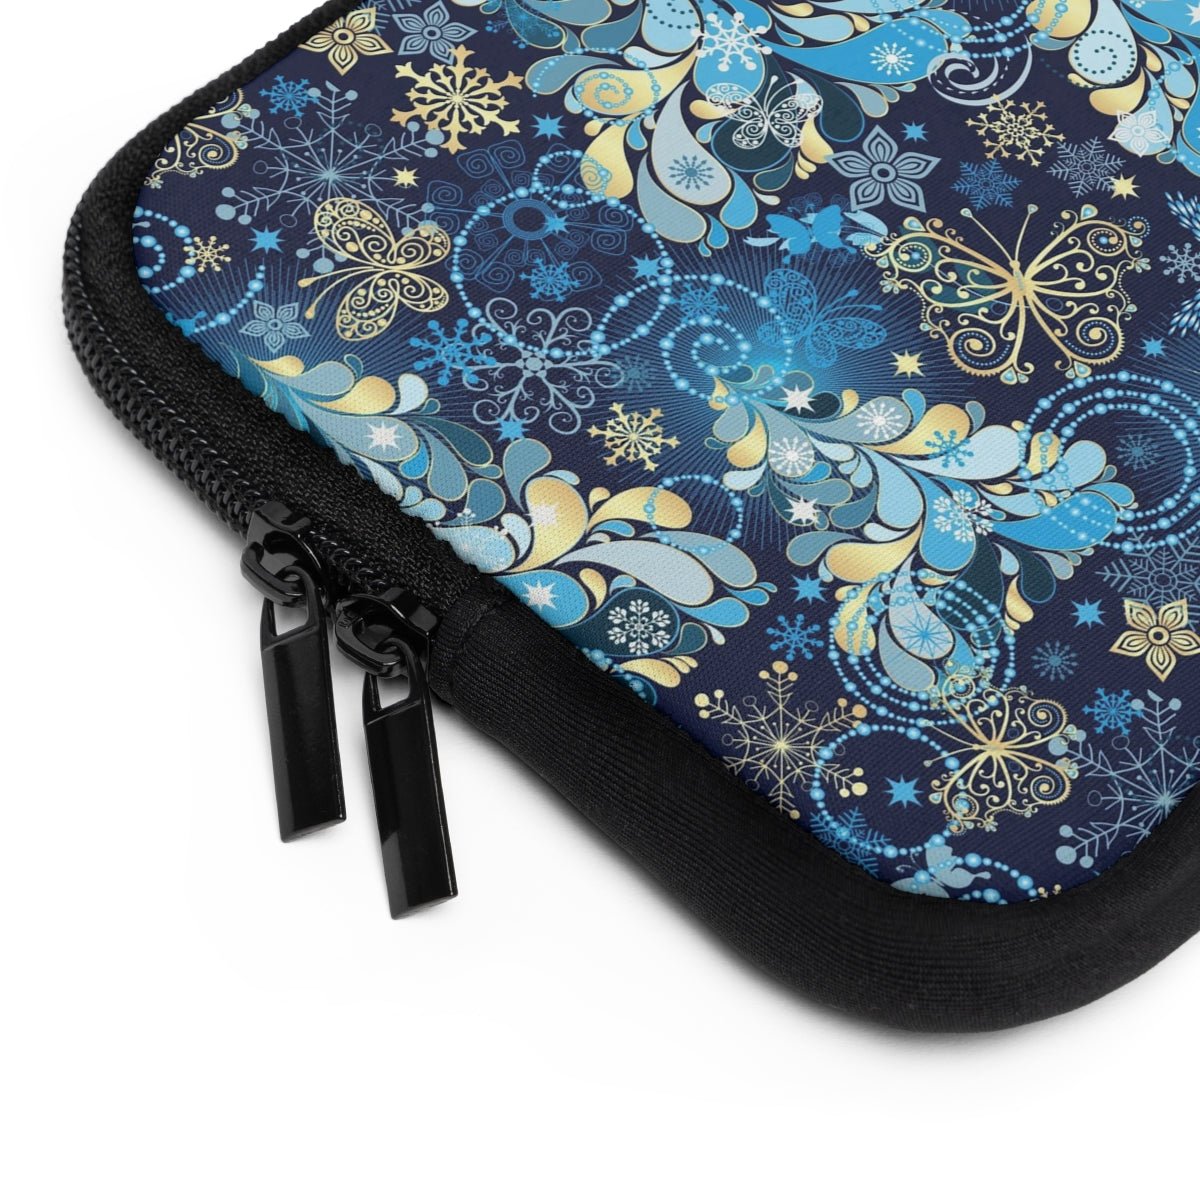 Magical Snowflakes Laptop Sleeve - Puffin Lime